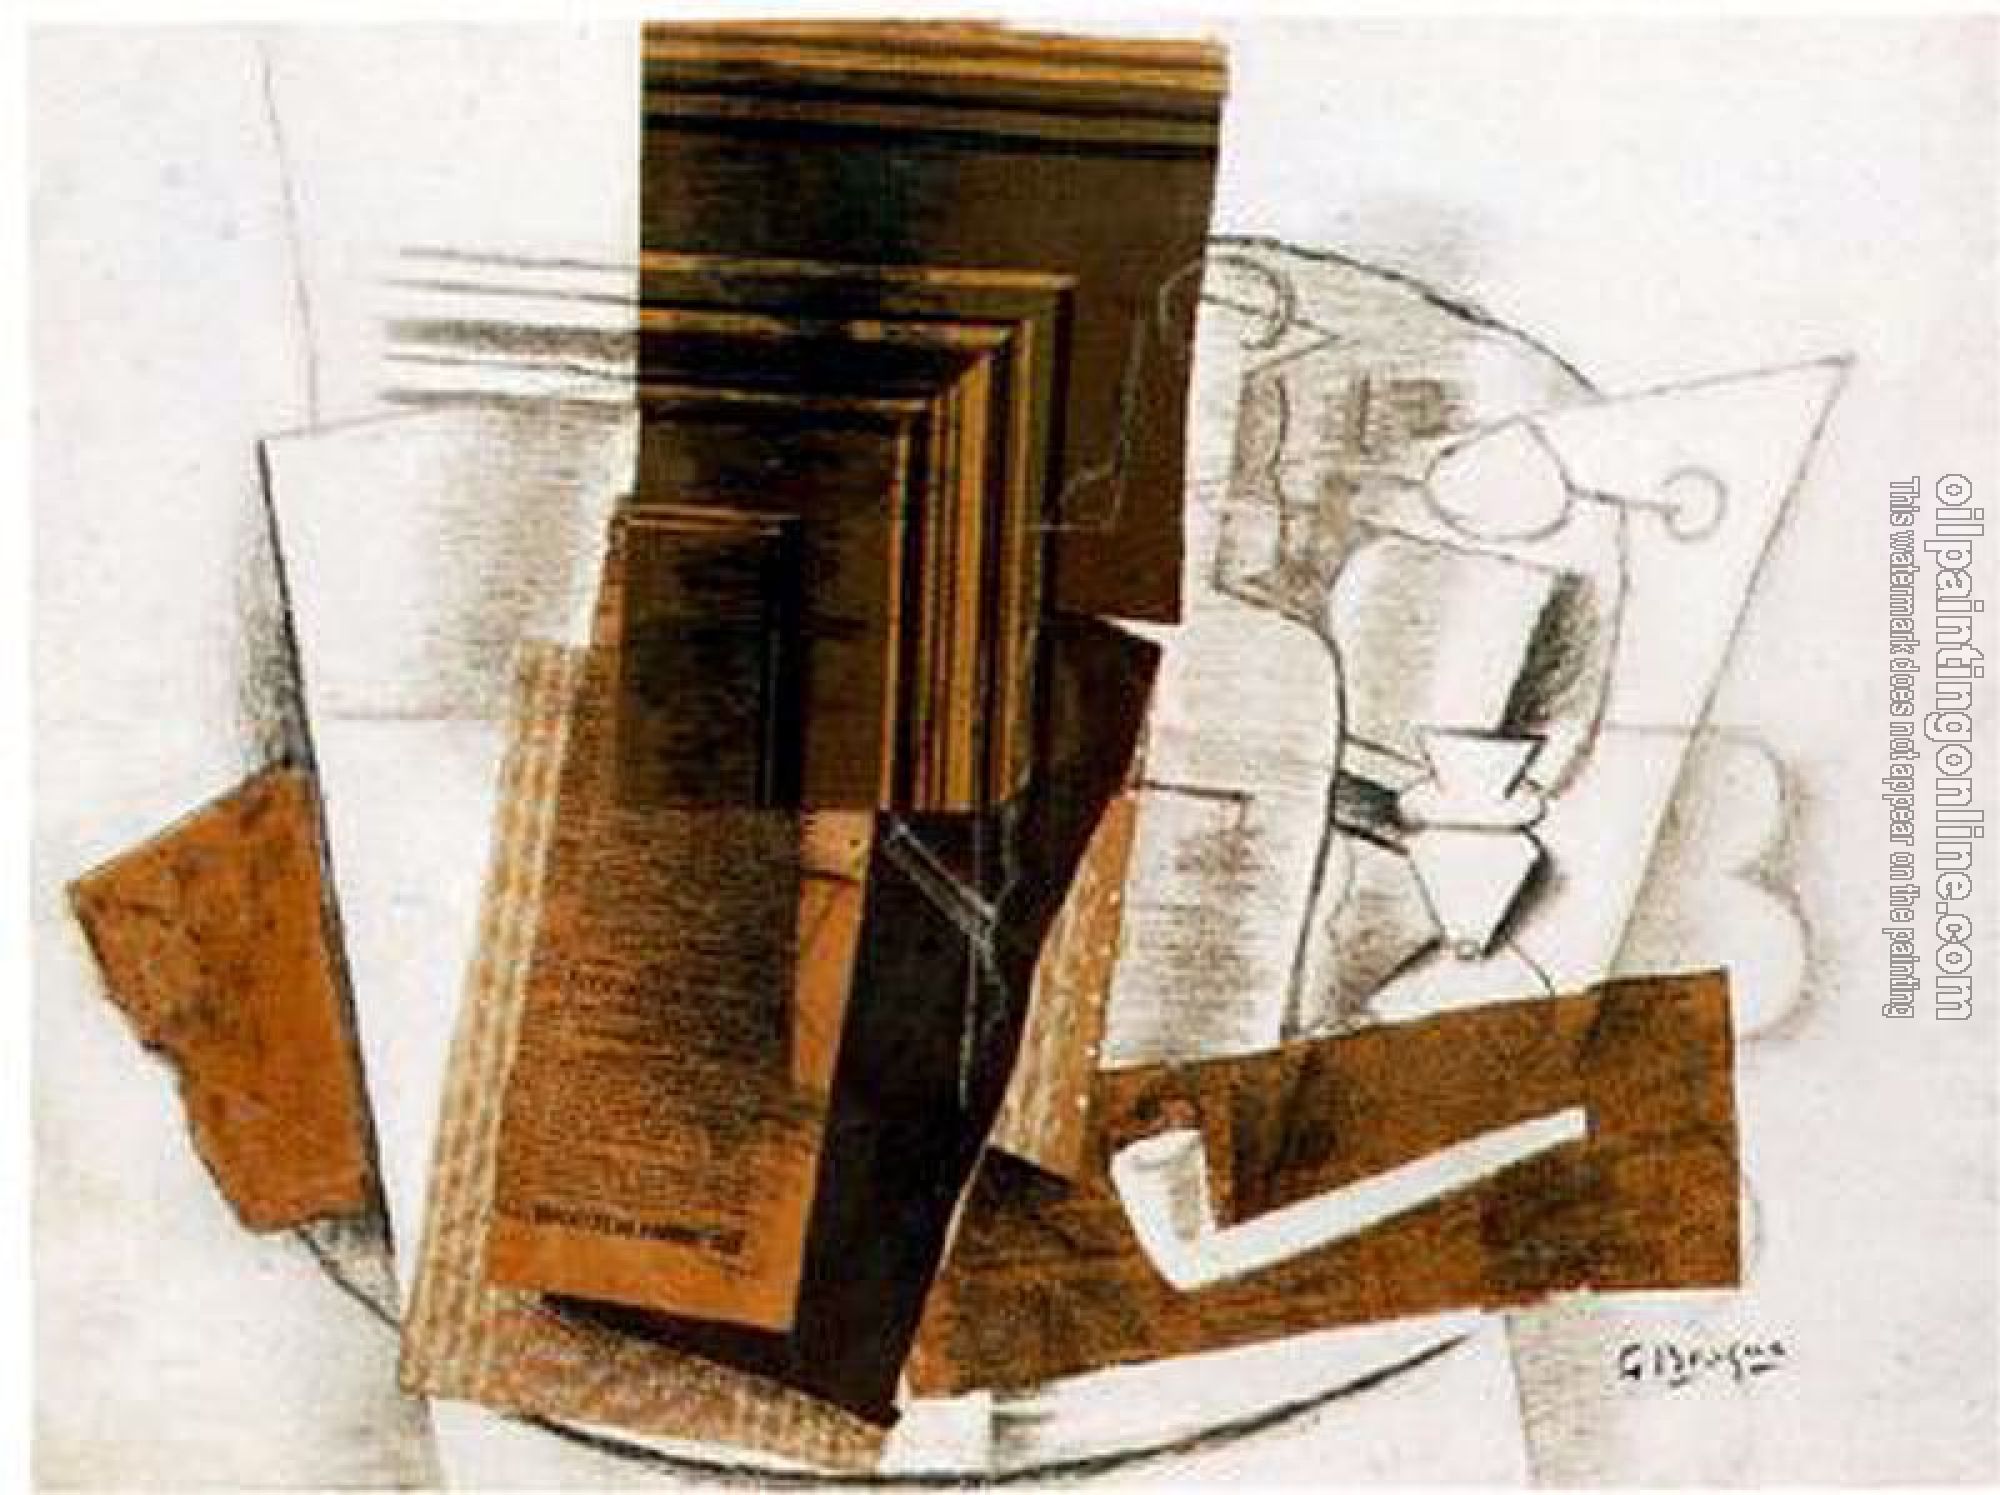 Georges Braque - Bottle, Newspaper, Pipe, and Glass